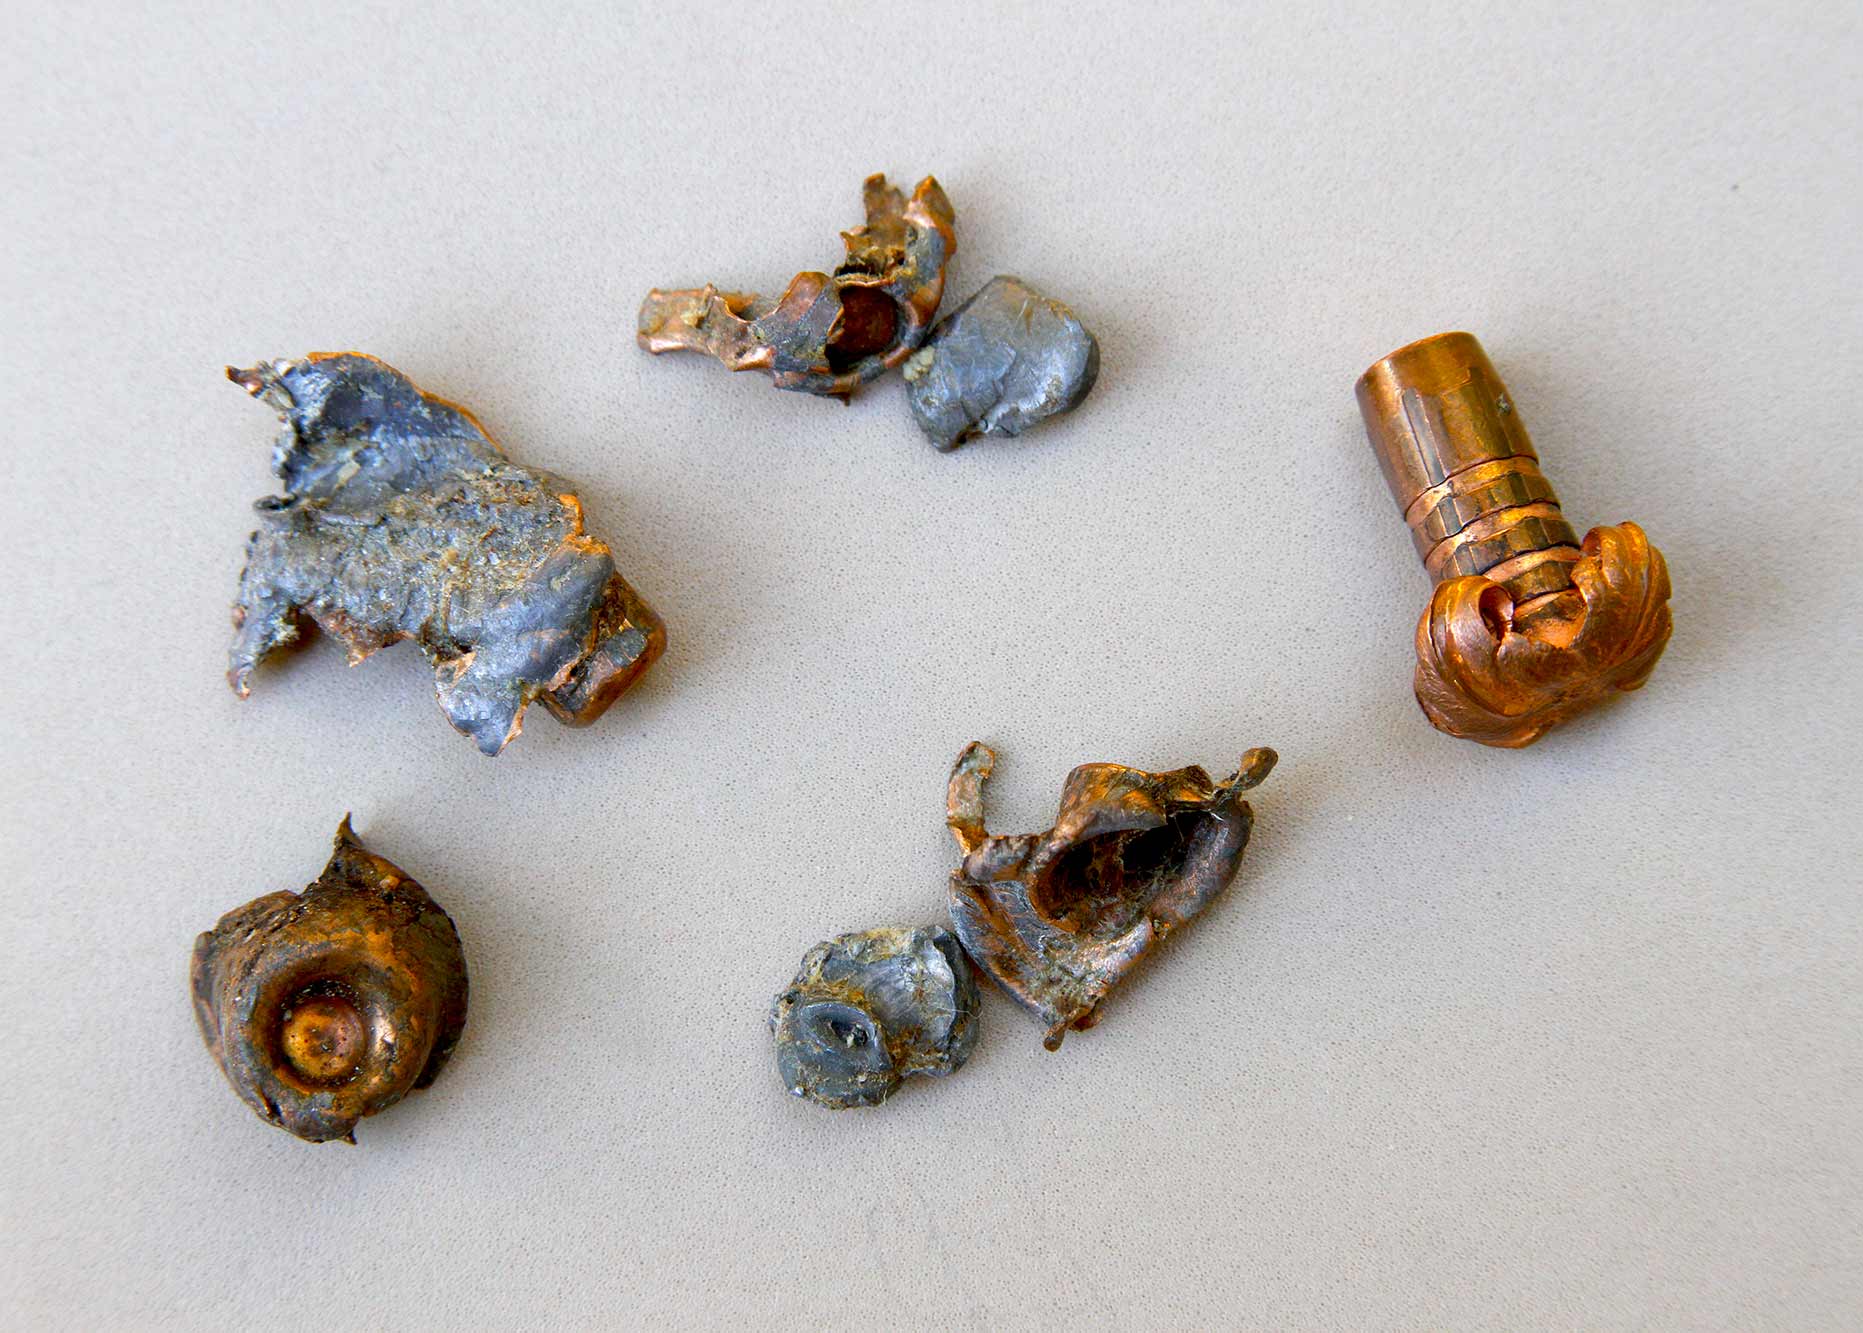 Used bullets changed into a variety of widths, lengths, shapes, fragments and tissue tearing ability.